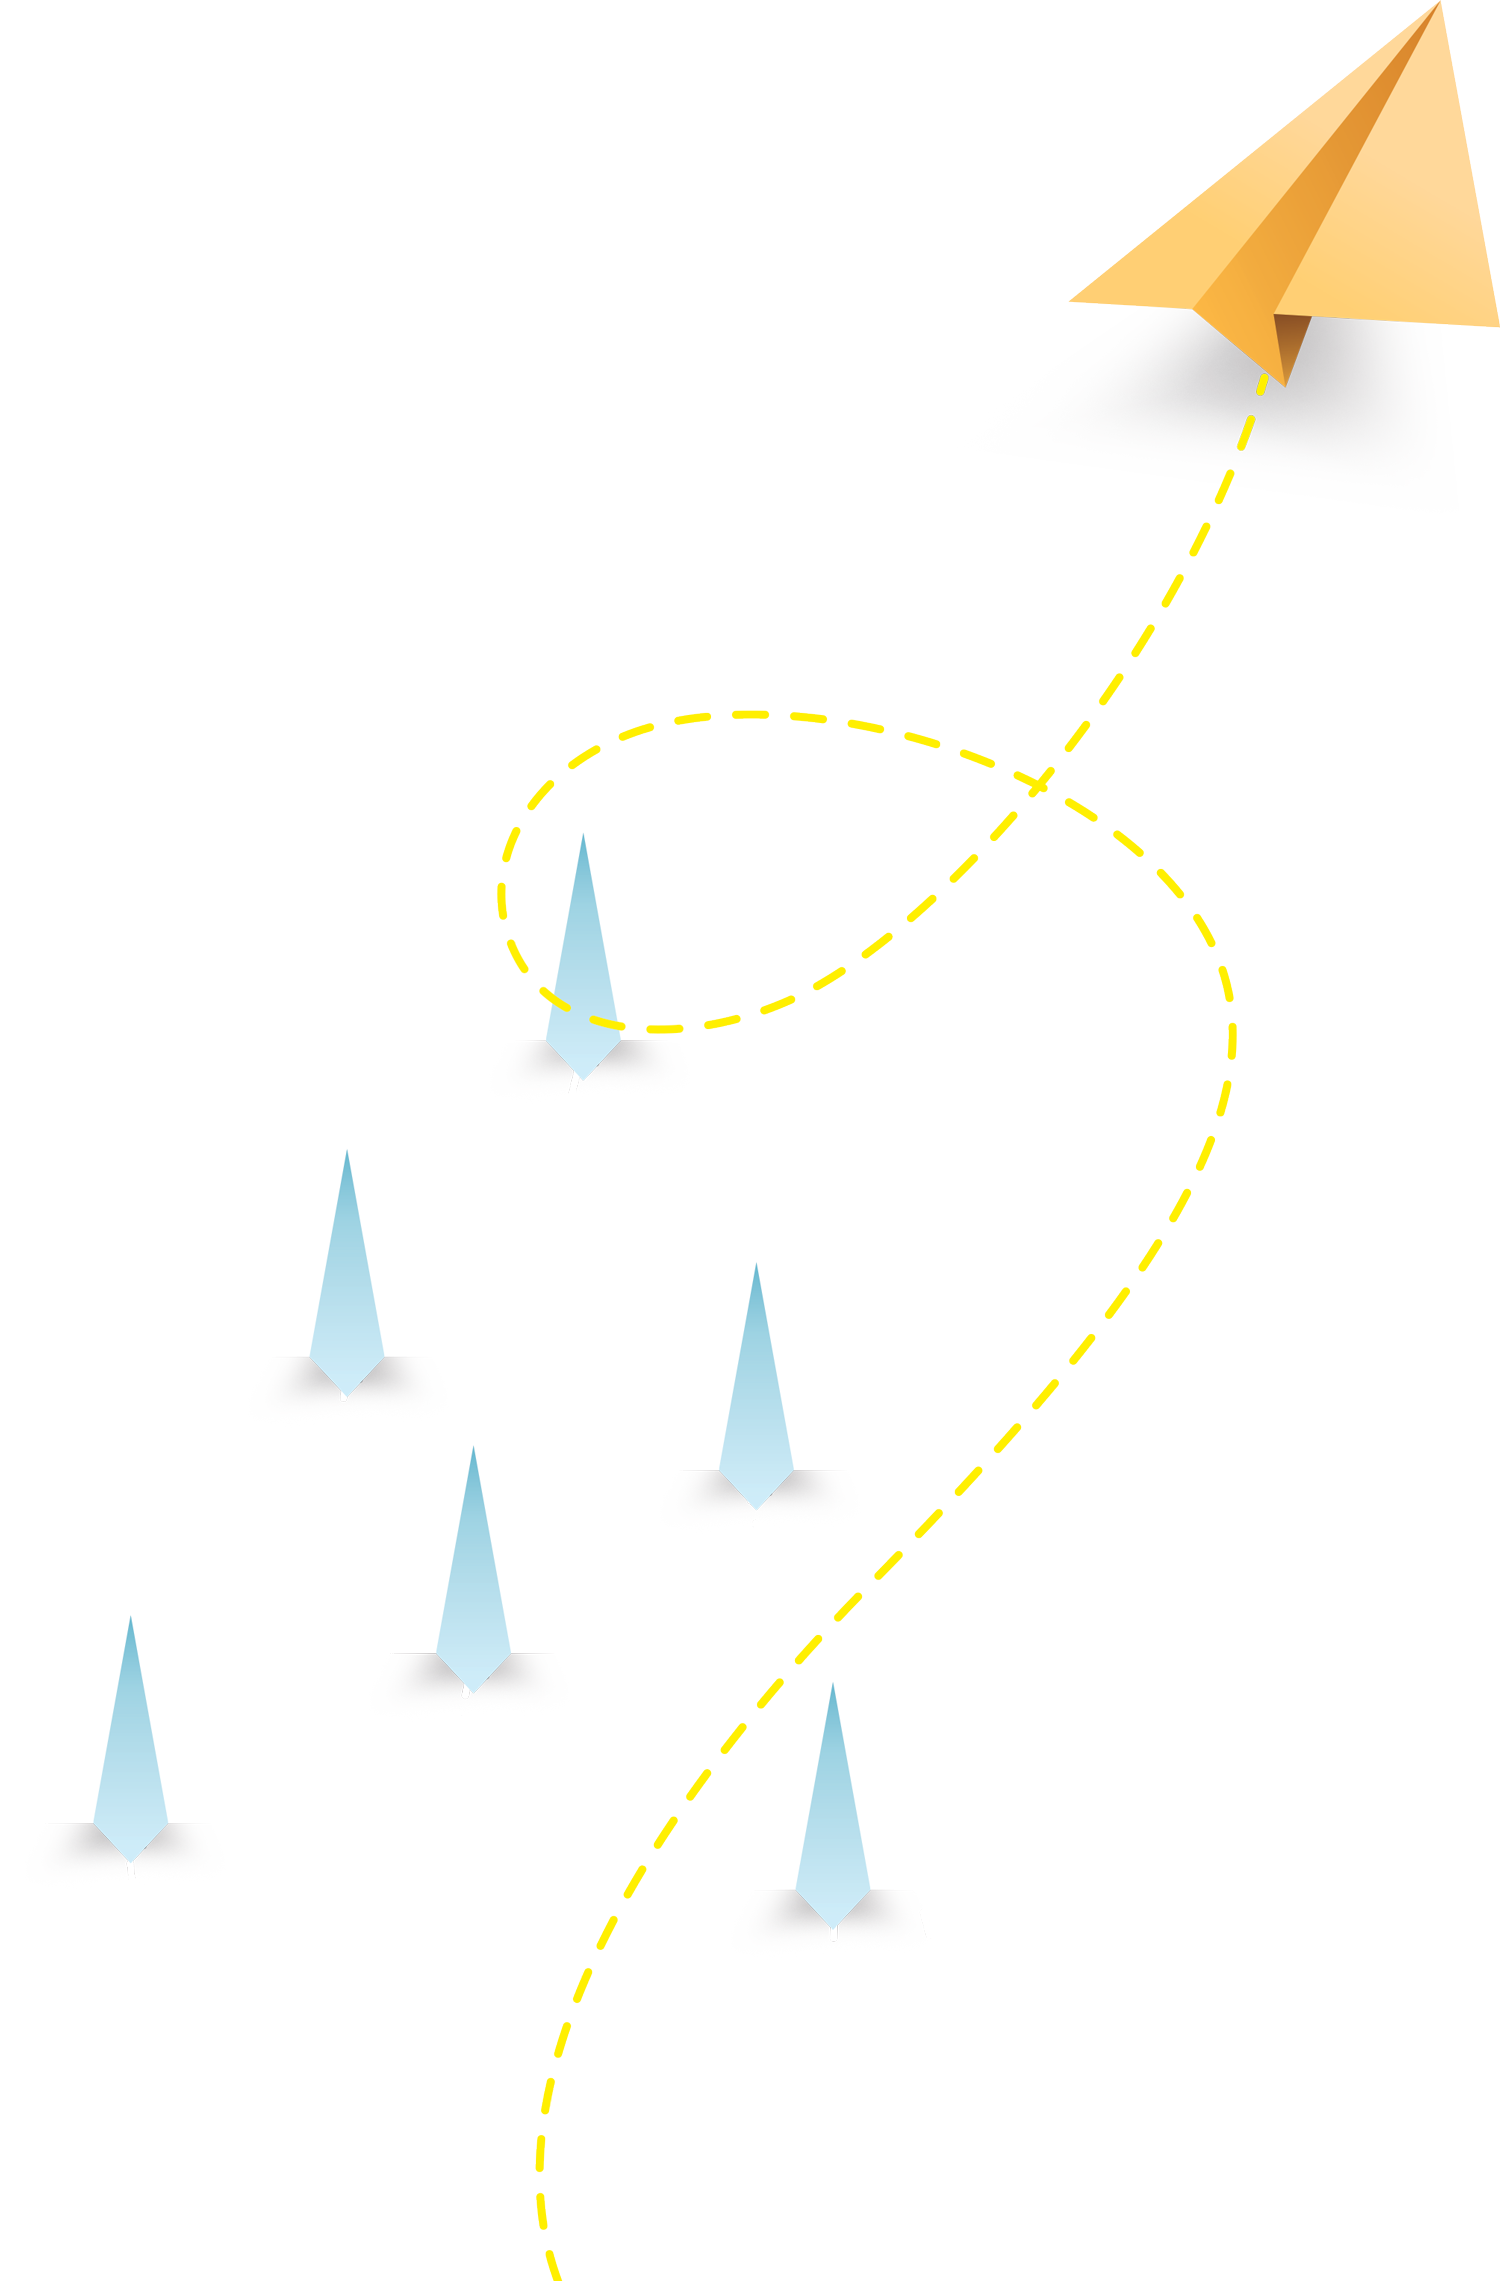 Illustration of paper airplanes flying